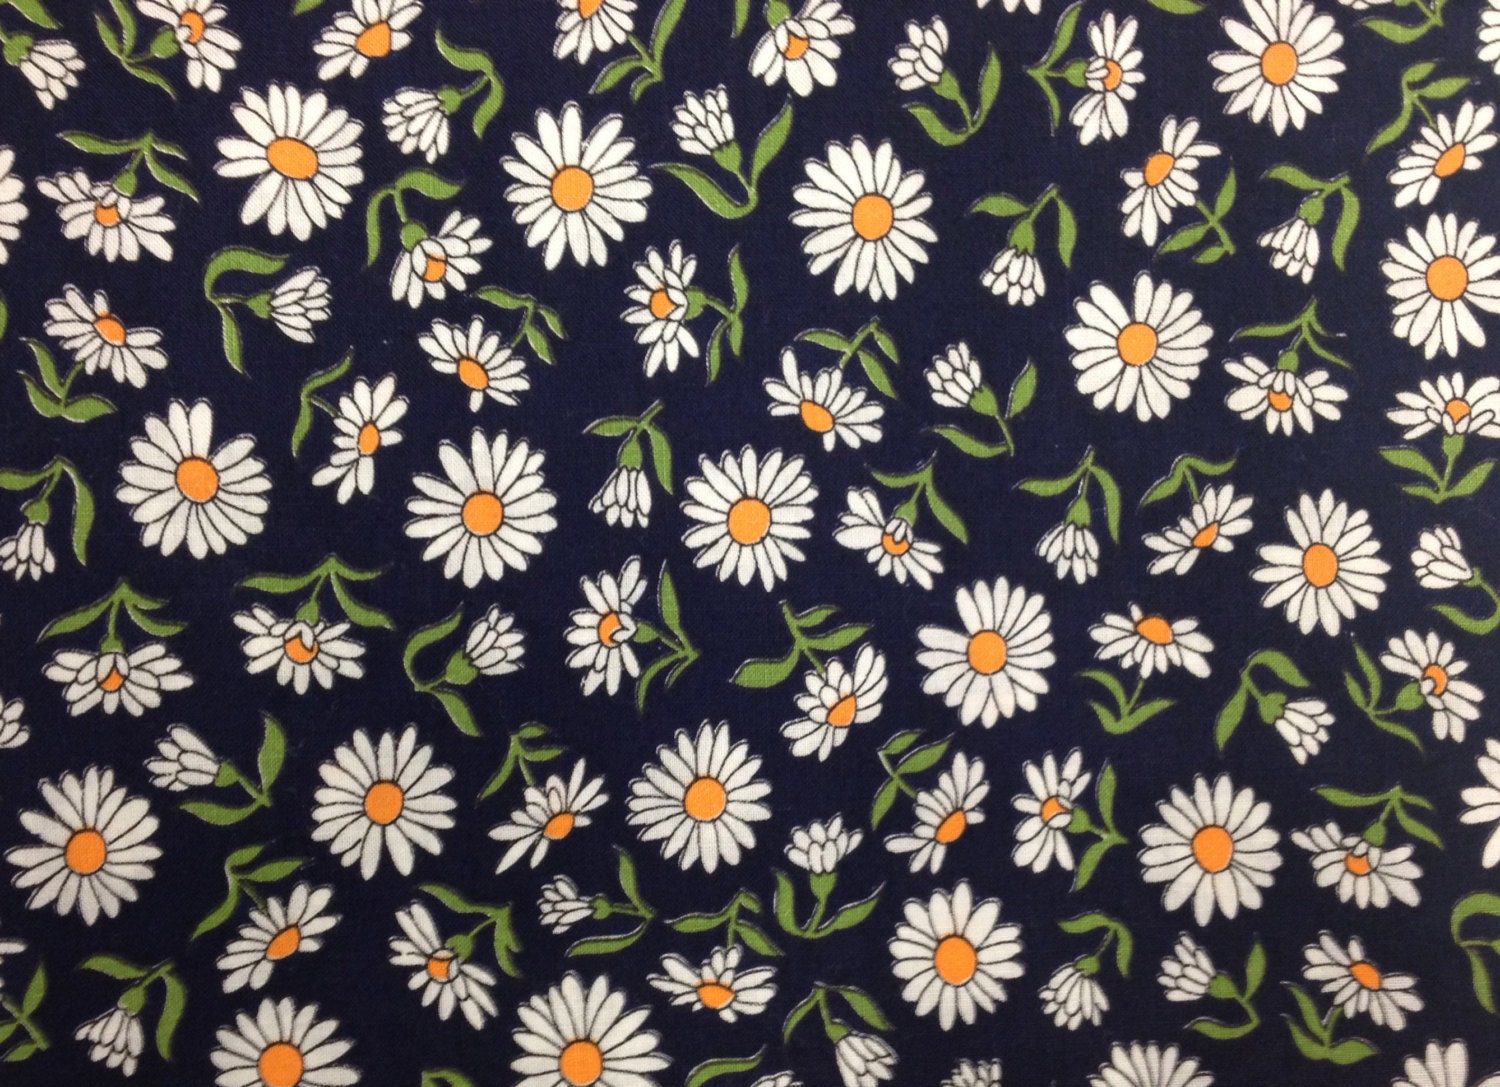 wallpapers sunflowers tumblr Navy Print Daisy Yards Sweet Fabric 2 Blue